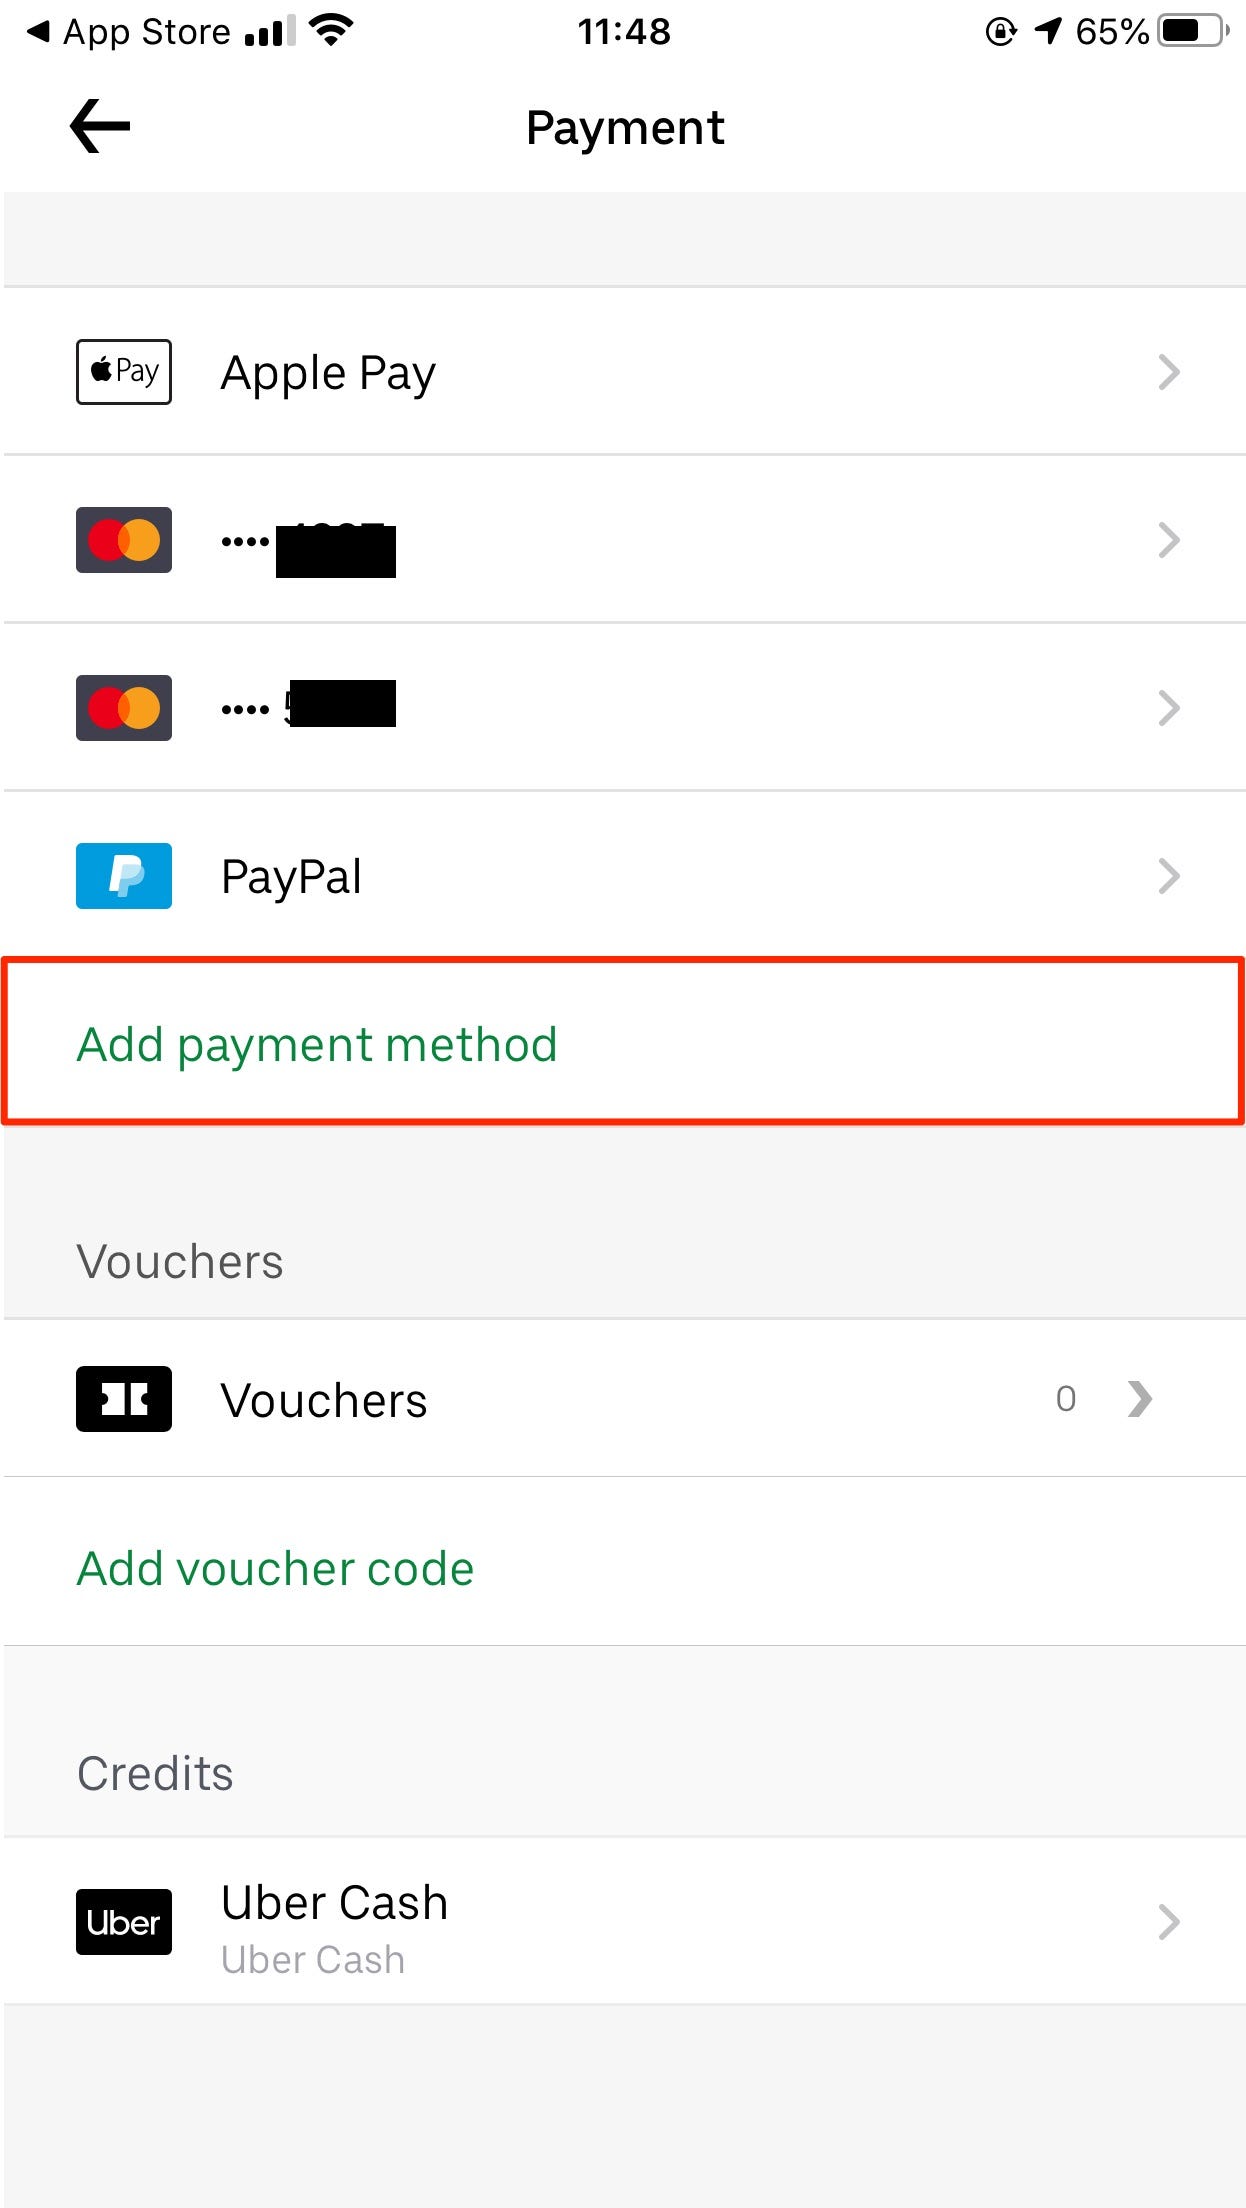 How to use an Uber Eats gift card to pay for orders on the app